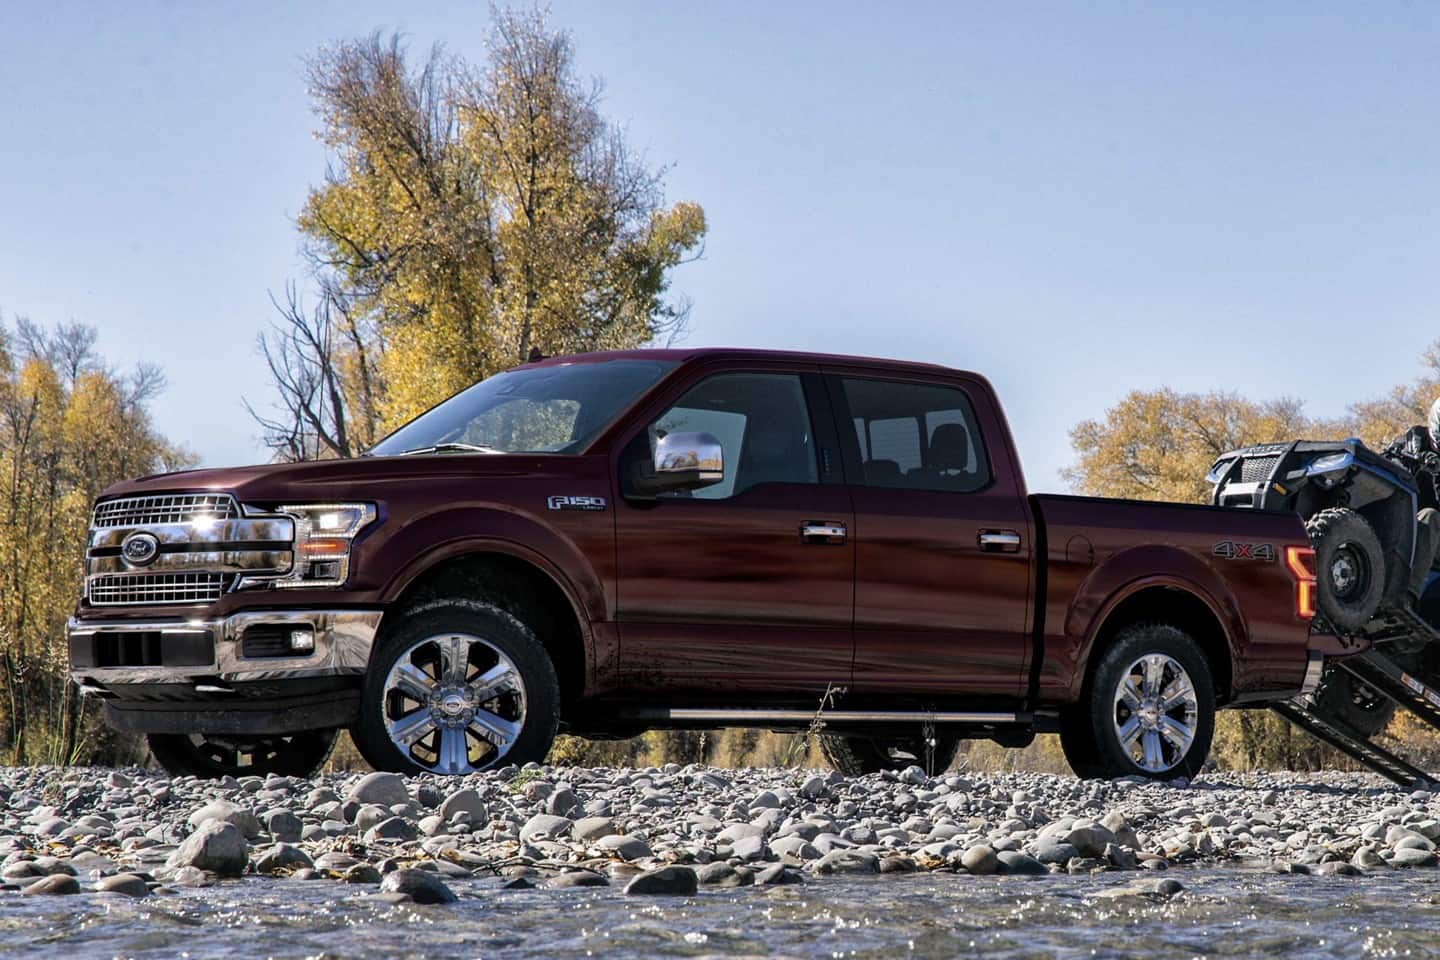 Used Ford F-150 for Sale near Troy, AL